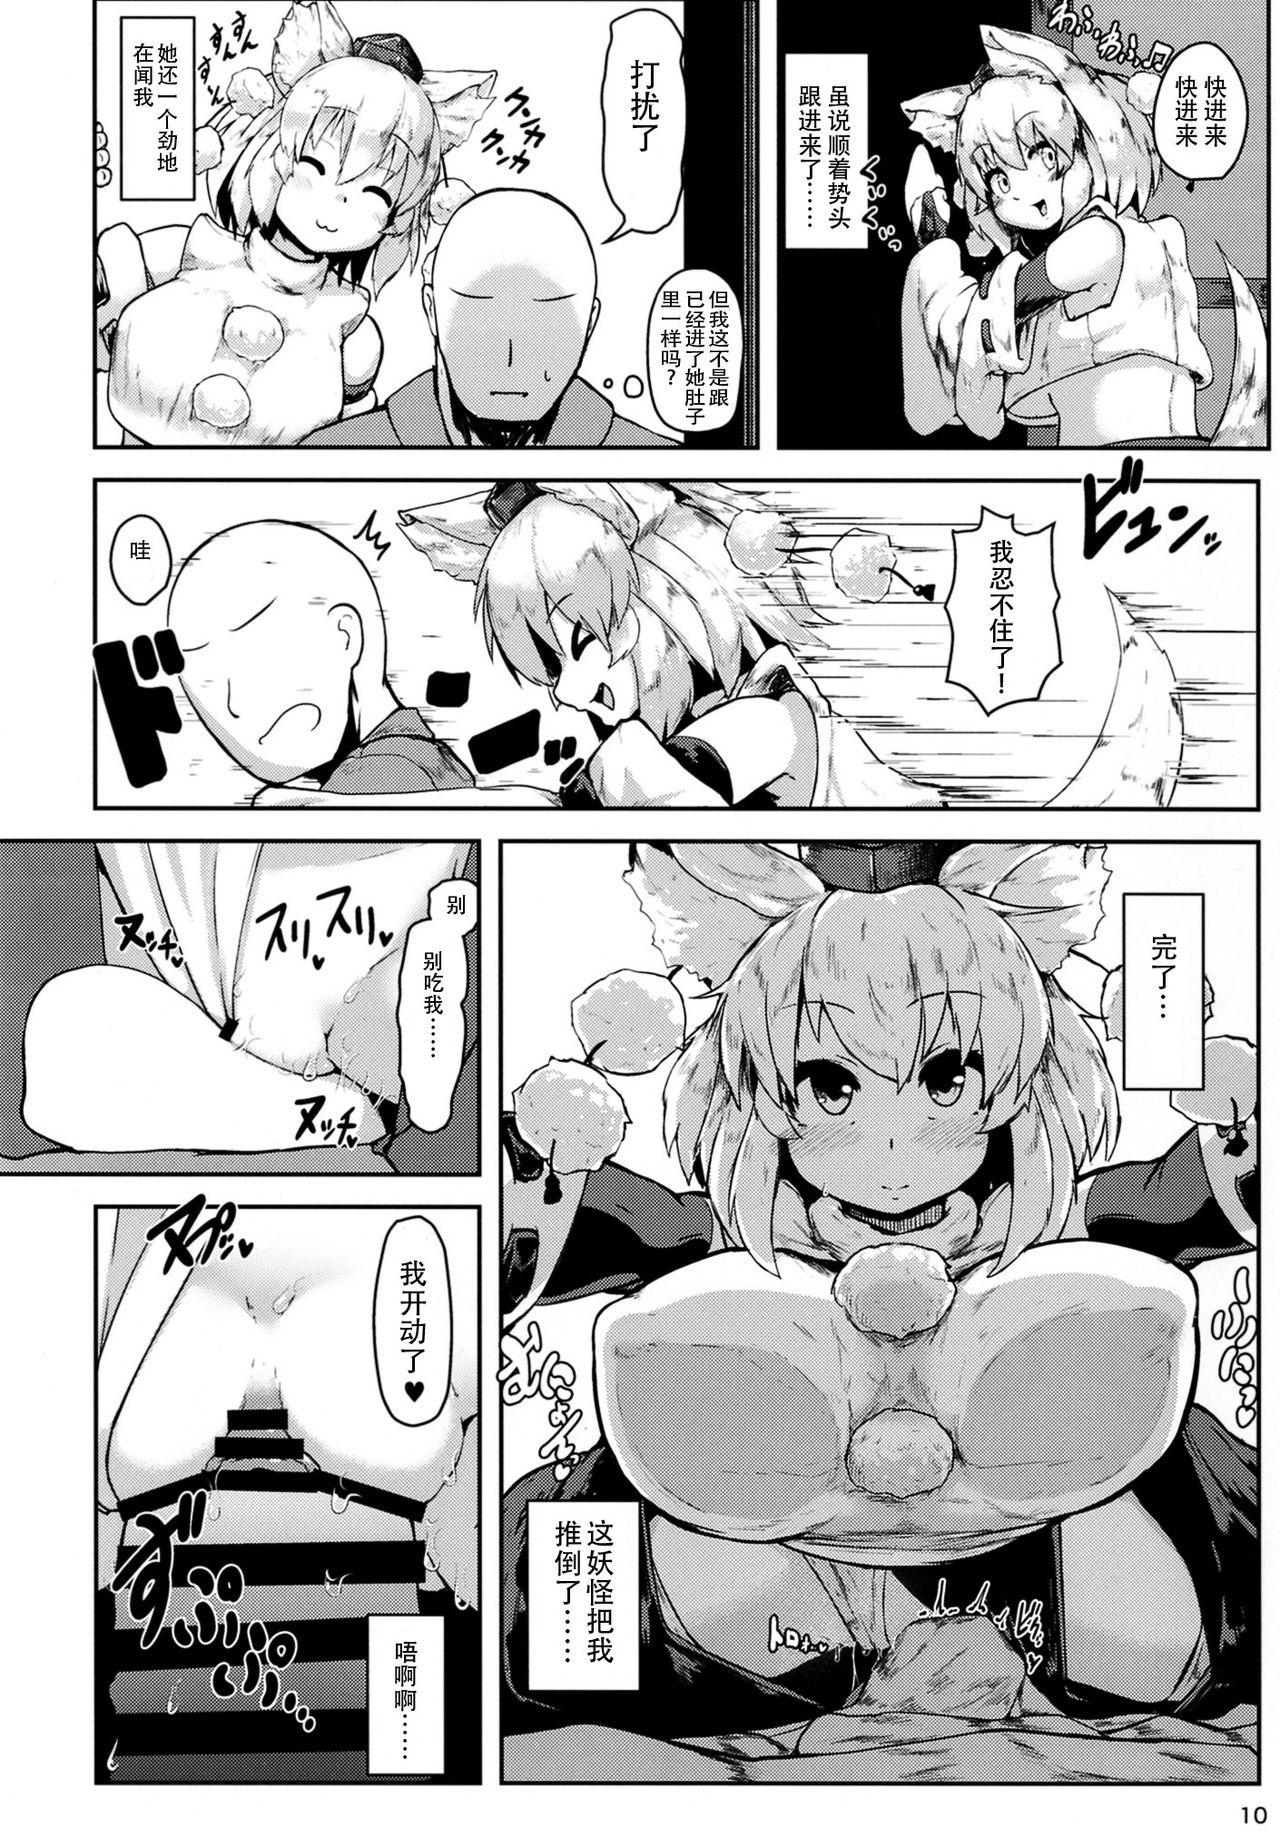 Nasty Porn Oppai Momiji - Touhou project Hot Blow Jobs - Page 10